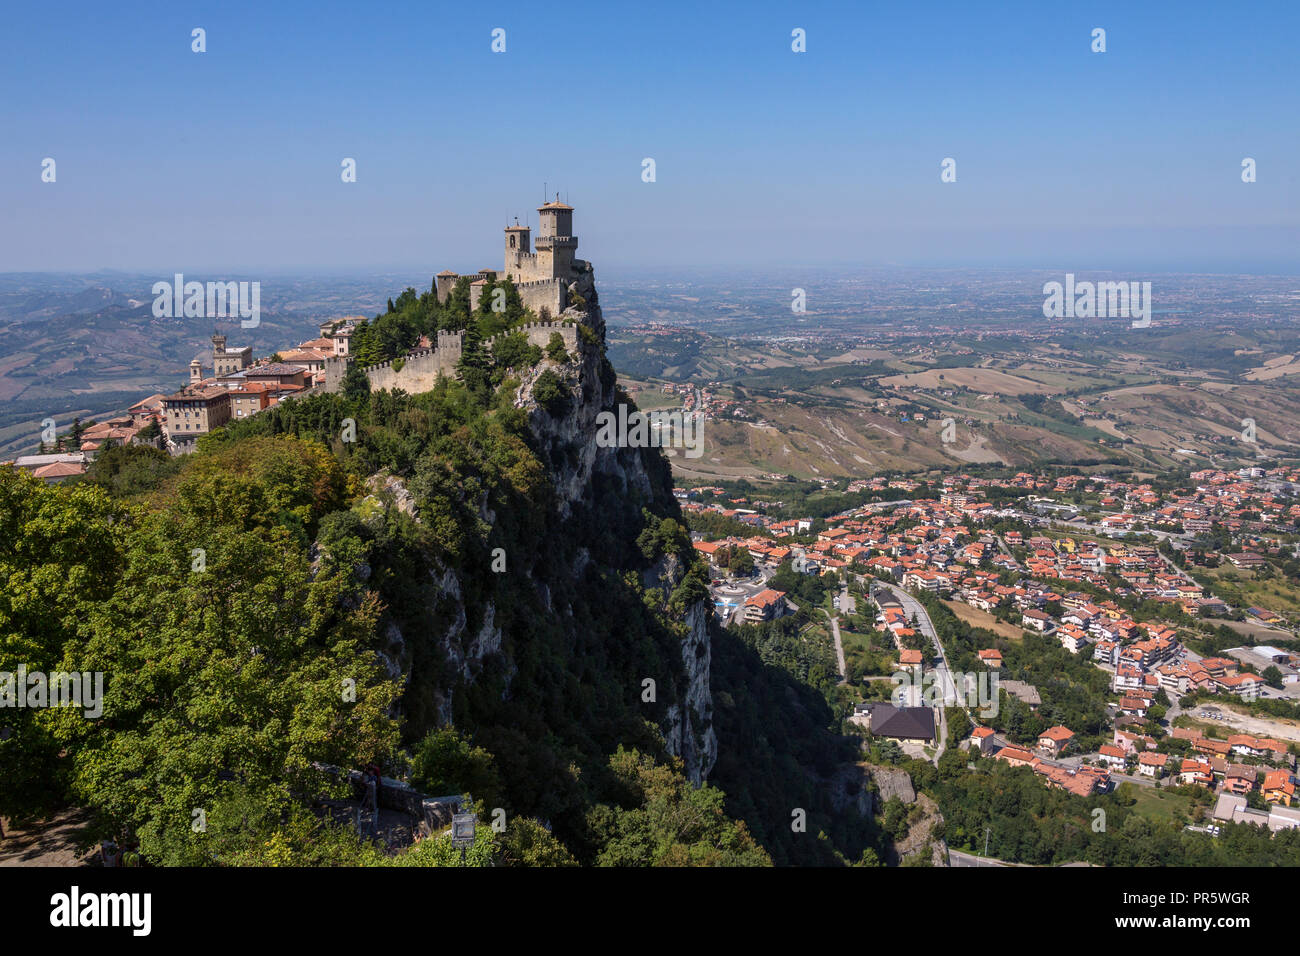 The fortress of Guaita on Mount Titano in San Marino. The Republic of San Marino is an enclaved microstate surrounded by Italy. San Marino claims to b Stock Photo